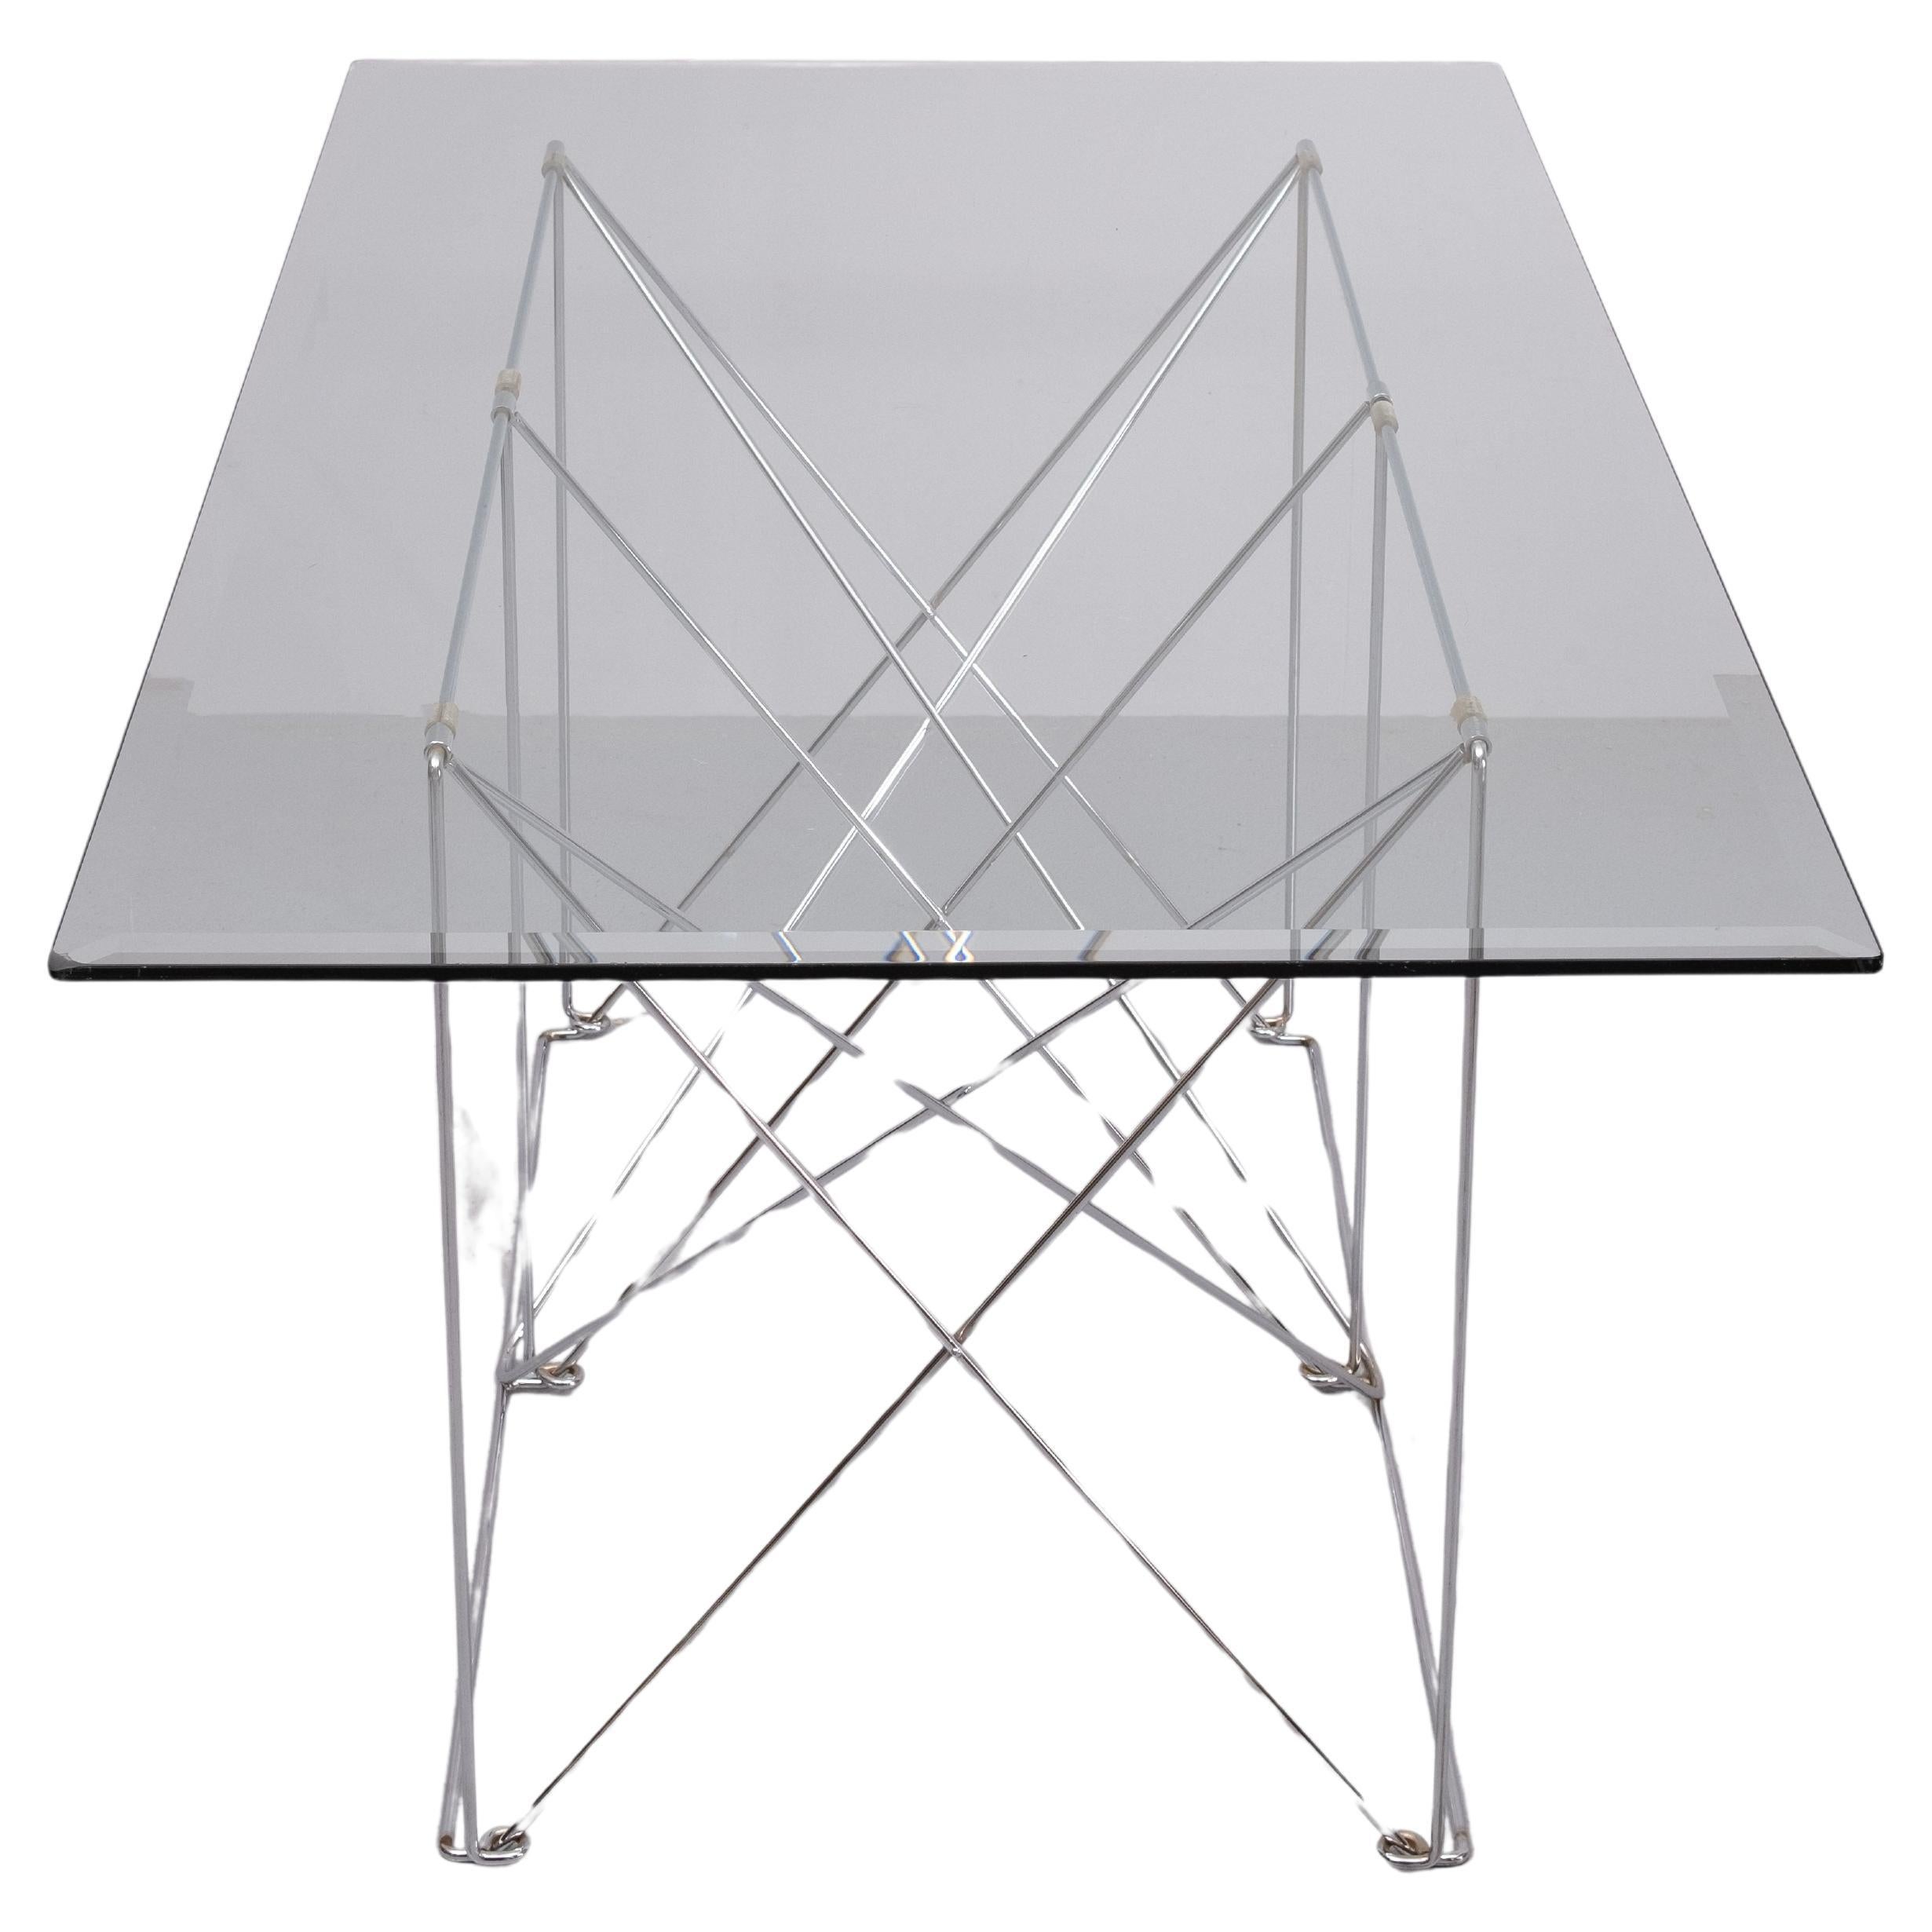 Minimalist Foldable dining room table created by French designer Max Sauze. Max Sauze is best known for his aluminum lamps. He very much enjoys working with furniture where minimalism and metal are at the forefront. This great looking  table is in